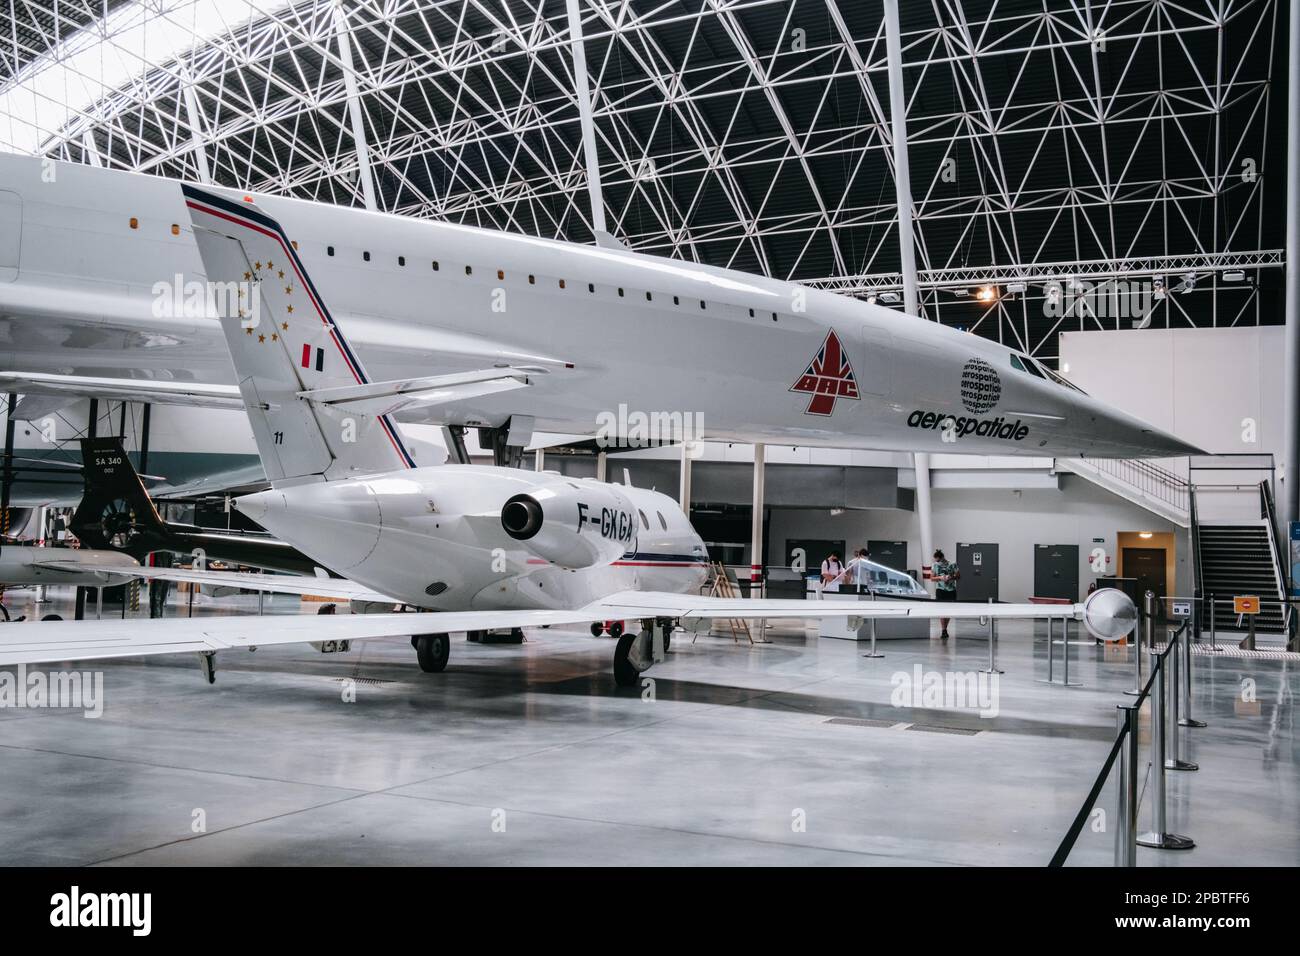 Airbus Concorde aircraft and Corvette SN-601 at the Aeroscopia museum near Toulouse, in the south of France (Haute Garonne) Stock Photo